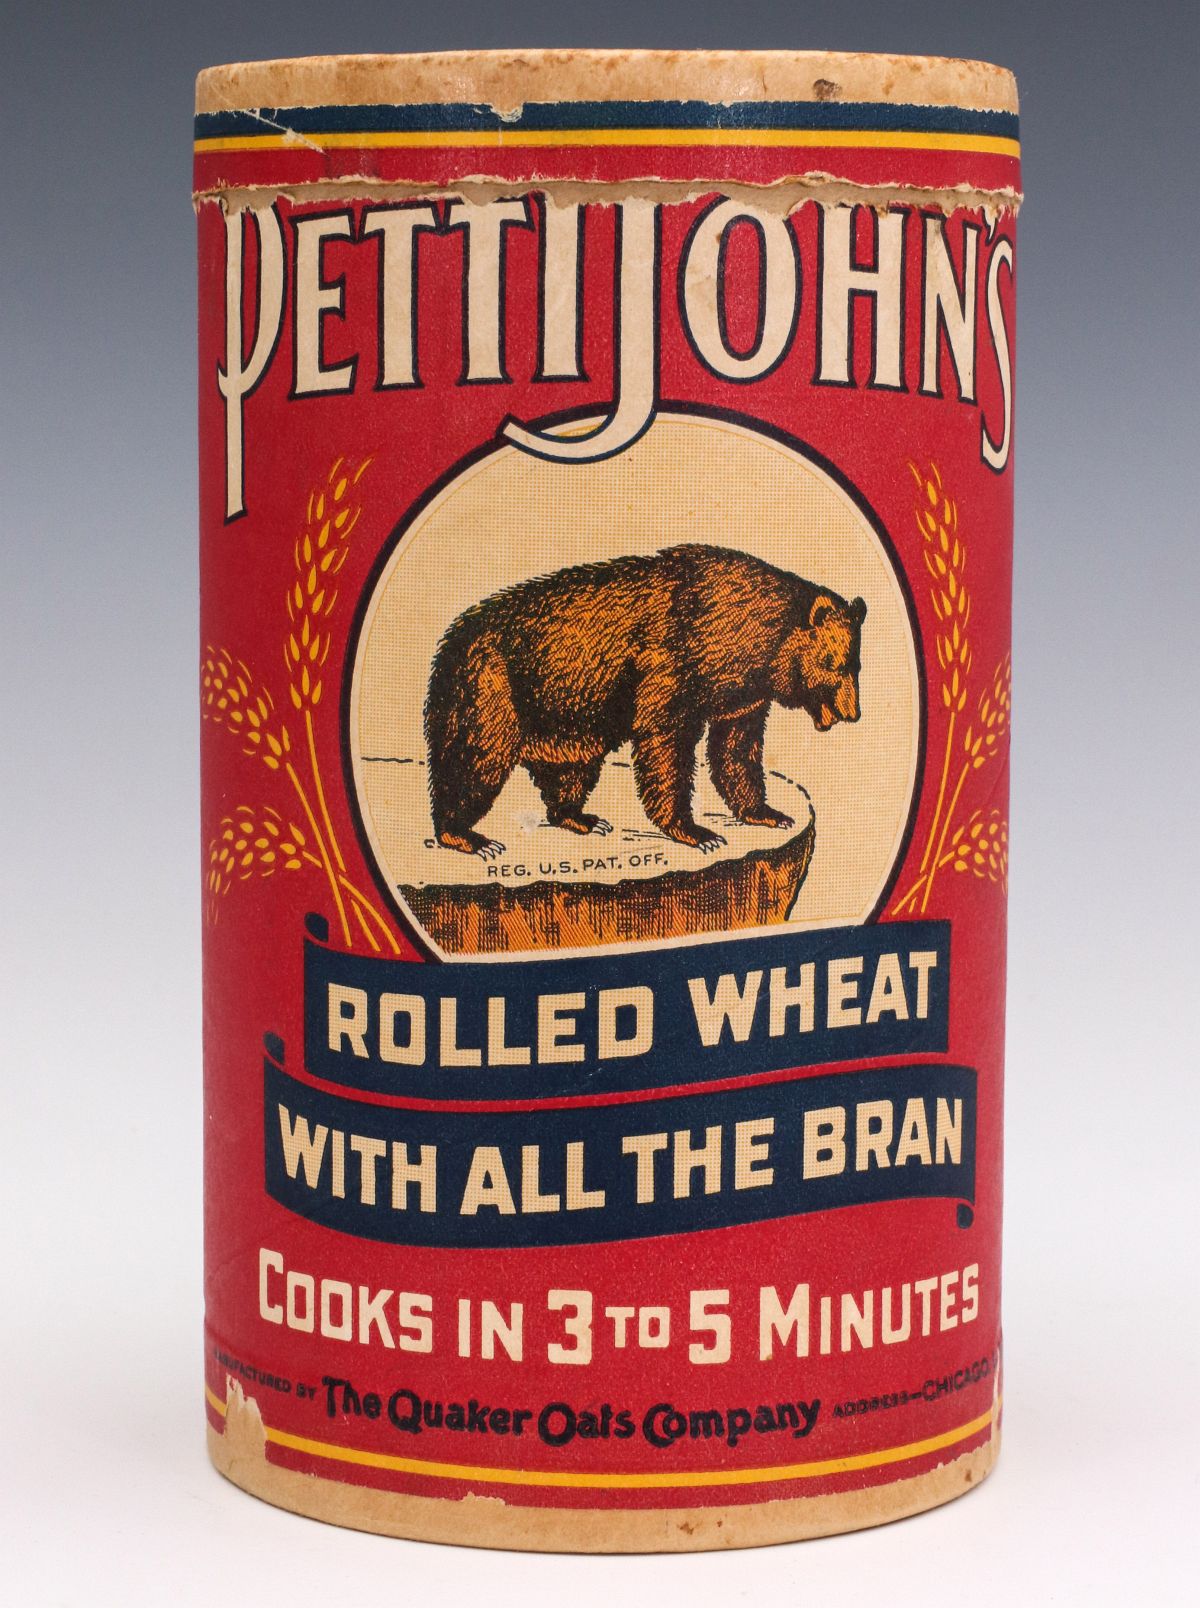 QUAKER OATS CO. PETTIJOHN'S ROLLED WHEAT CONTAINER